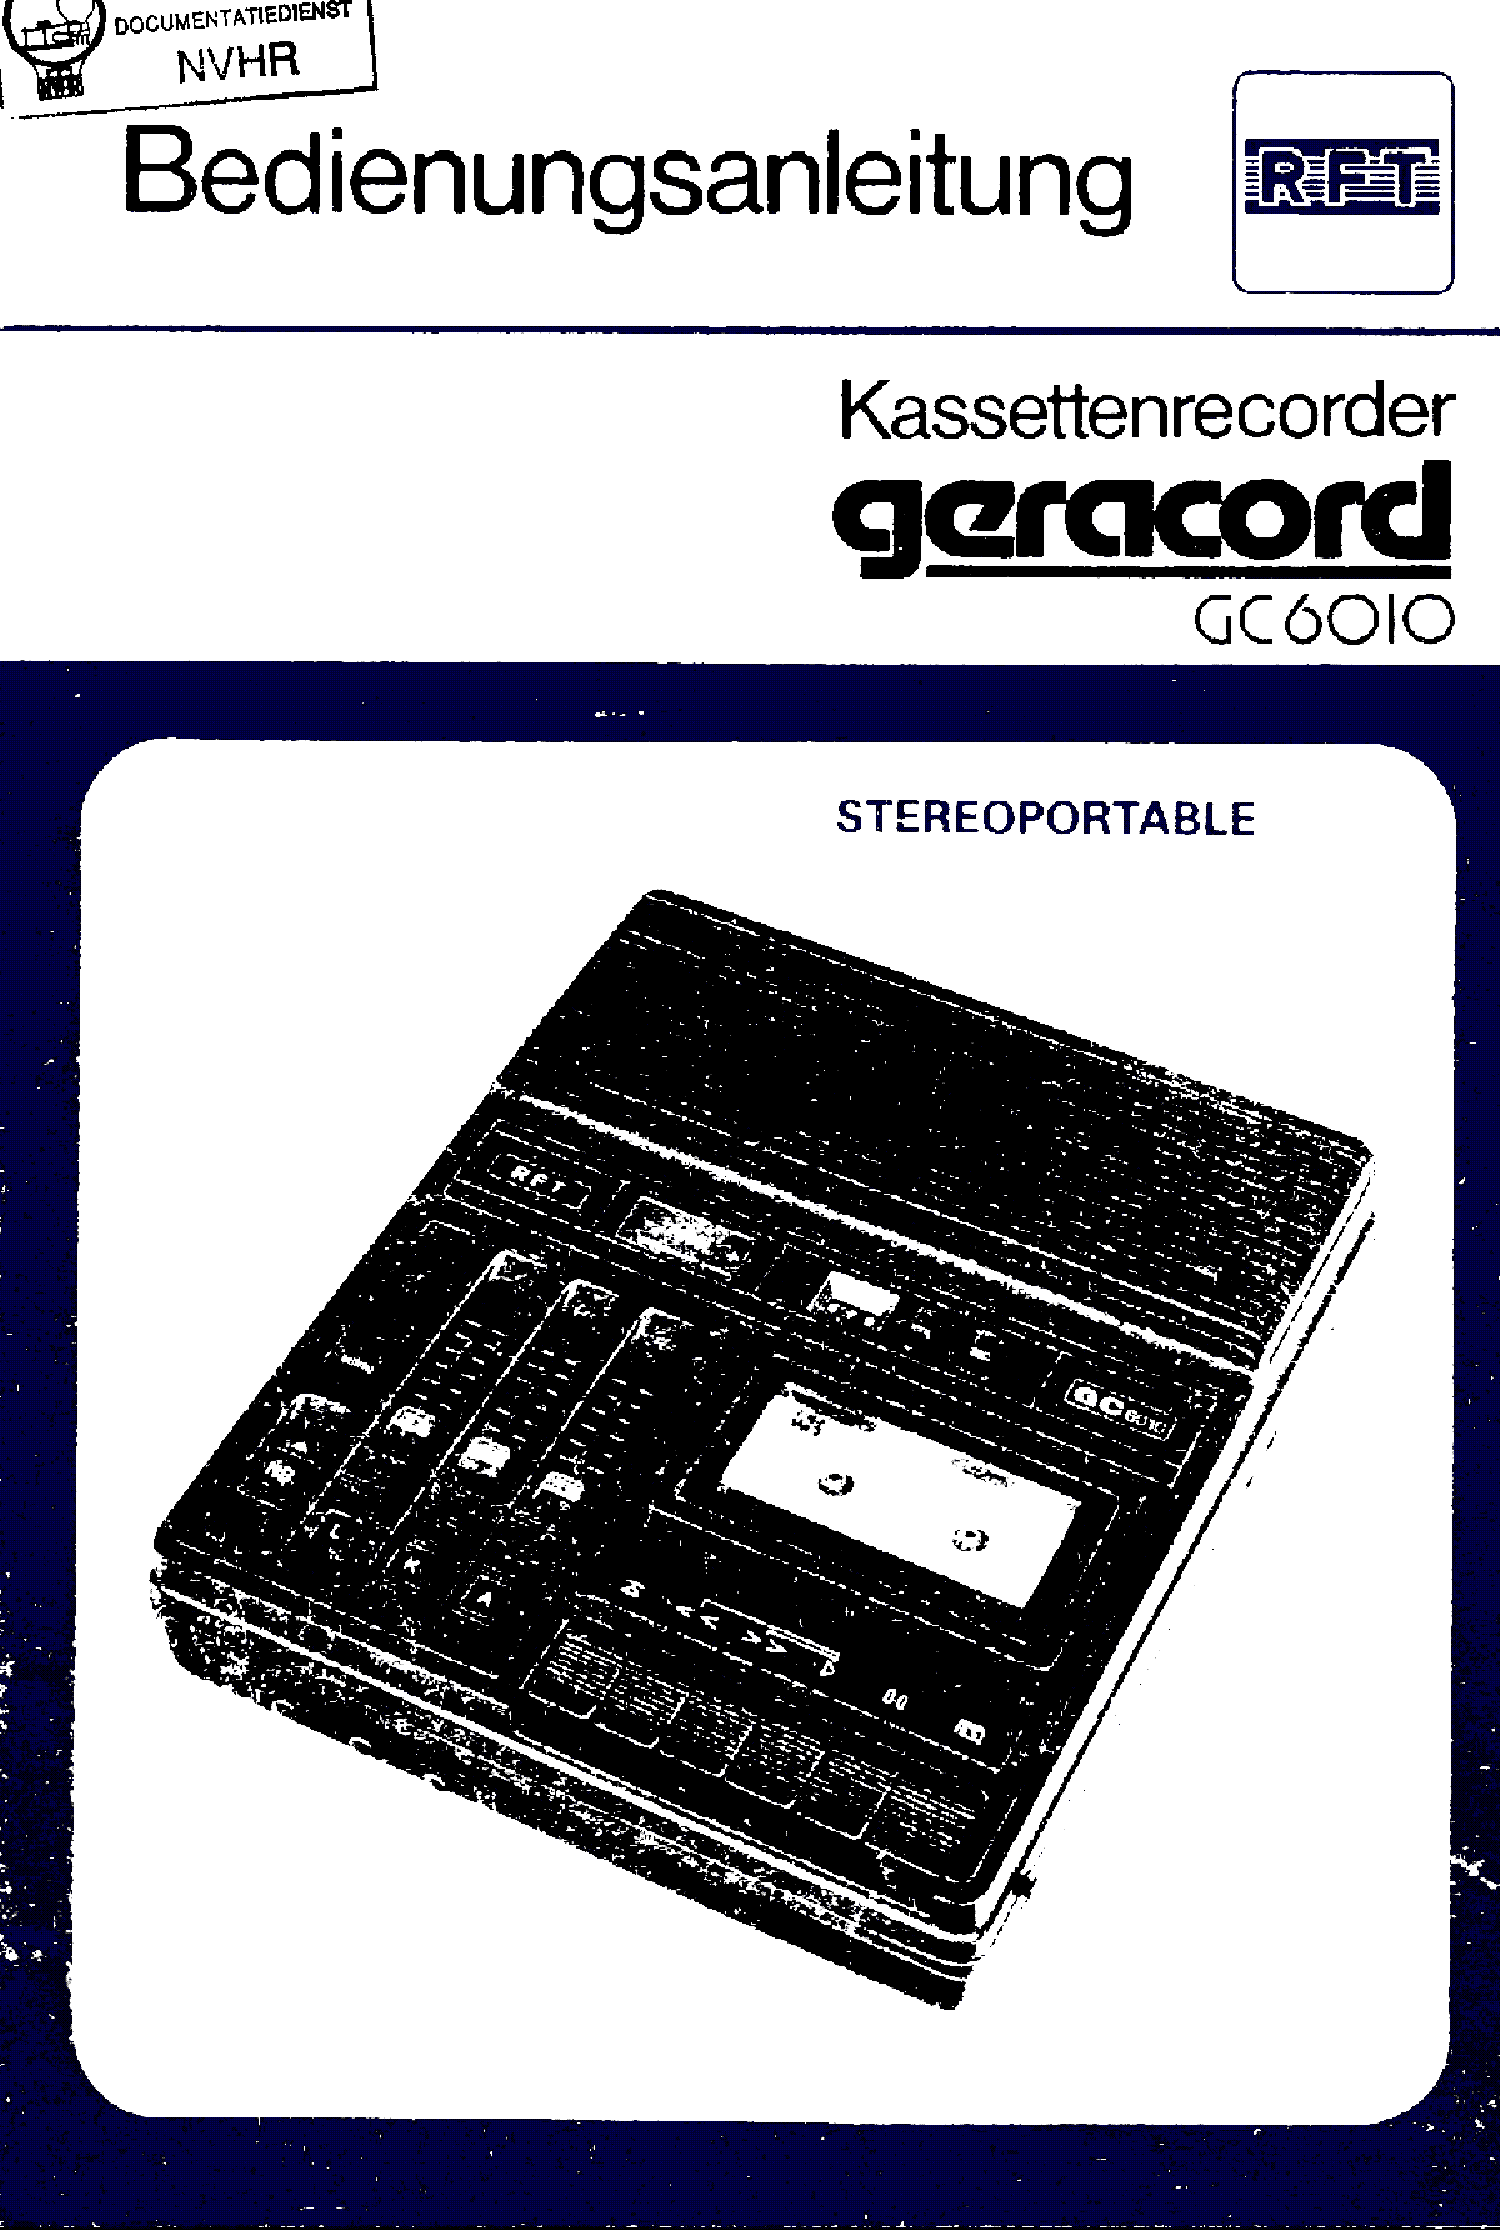 RFT-GERA GC6010 PORTABLE CASSETTE STEREO RECORDER USR SM Service Manual download, schematics, eeprom, repair info for experts